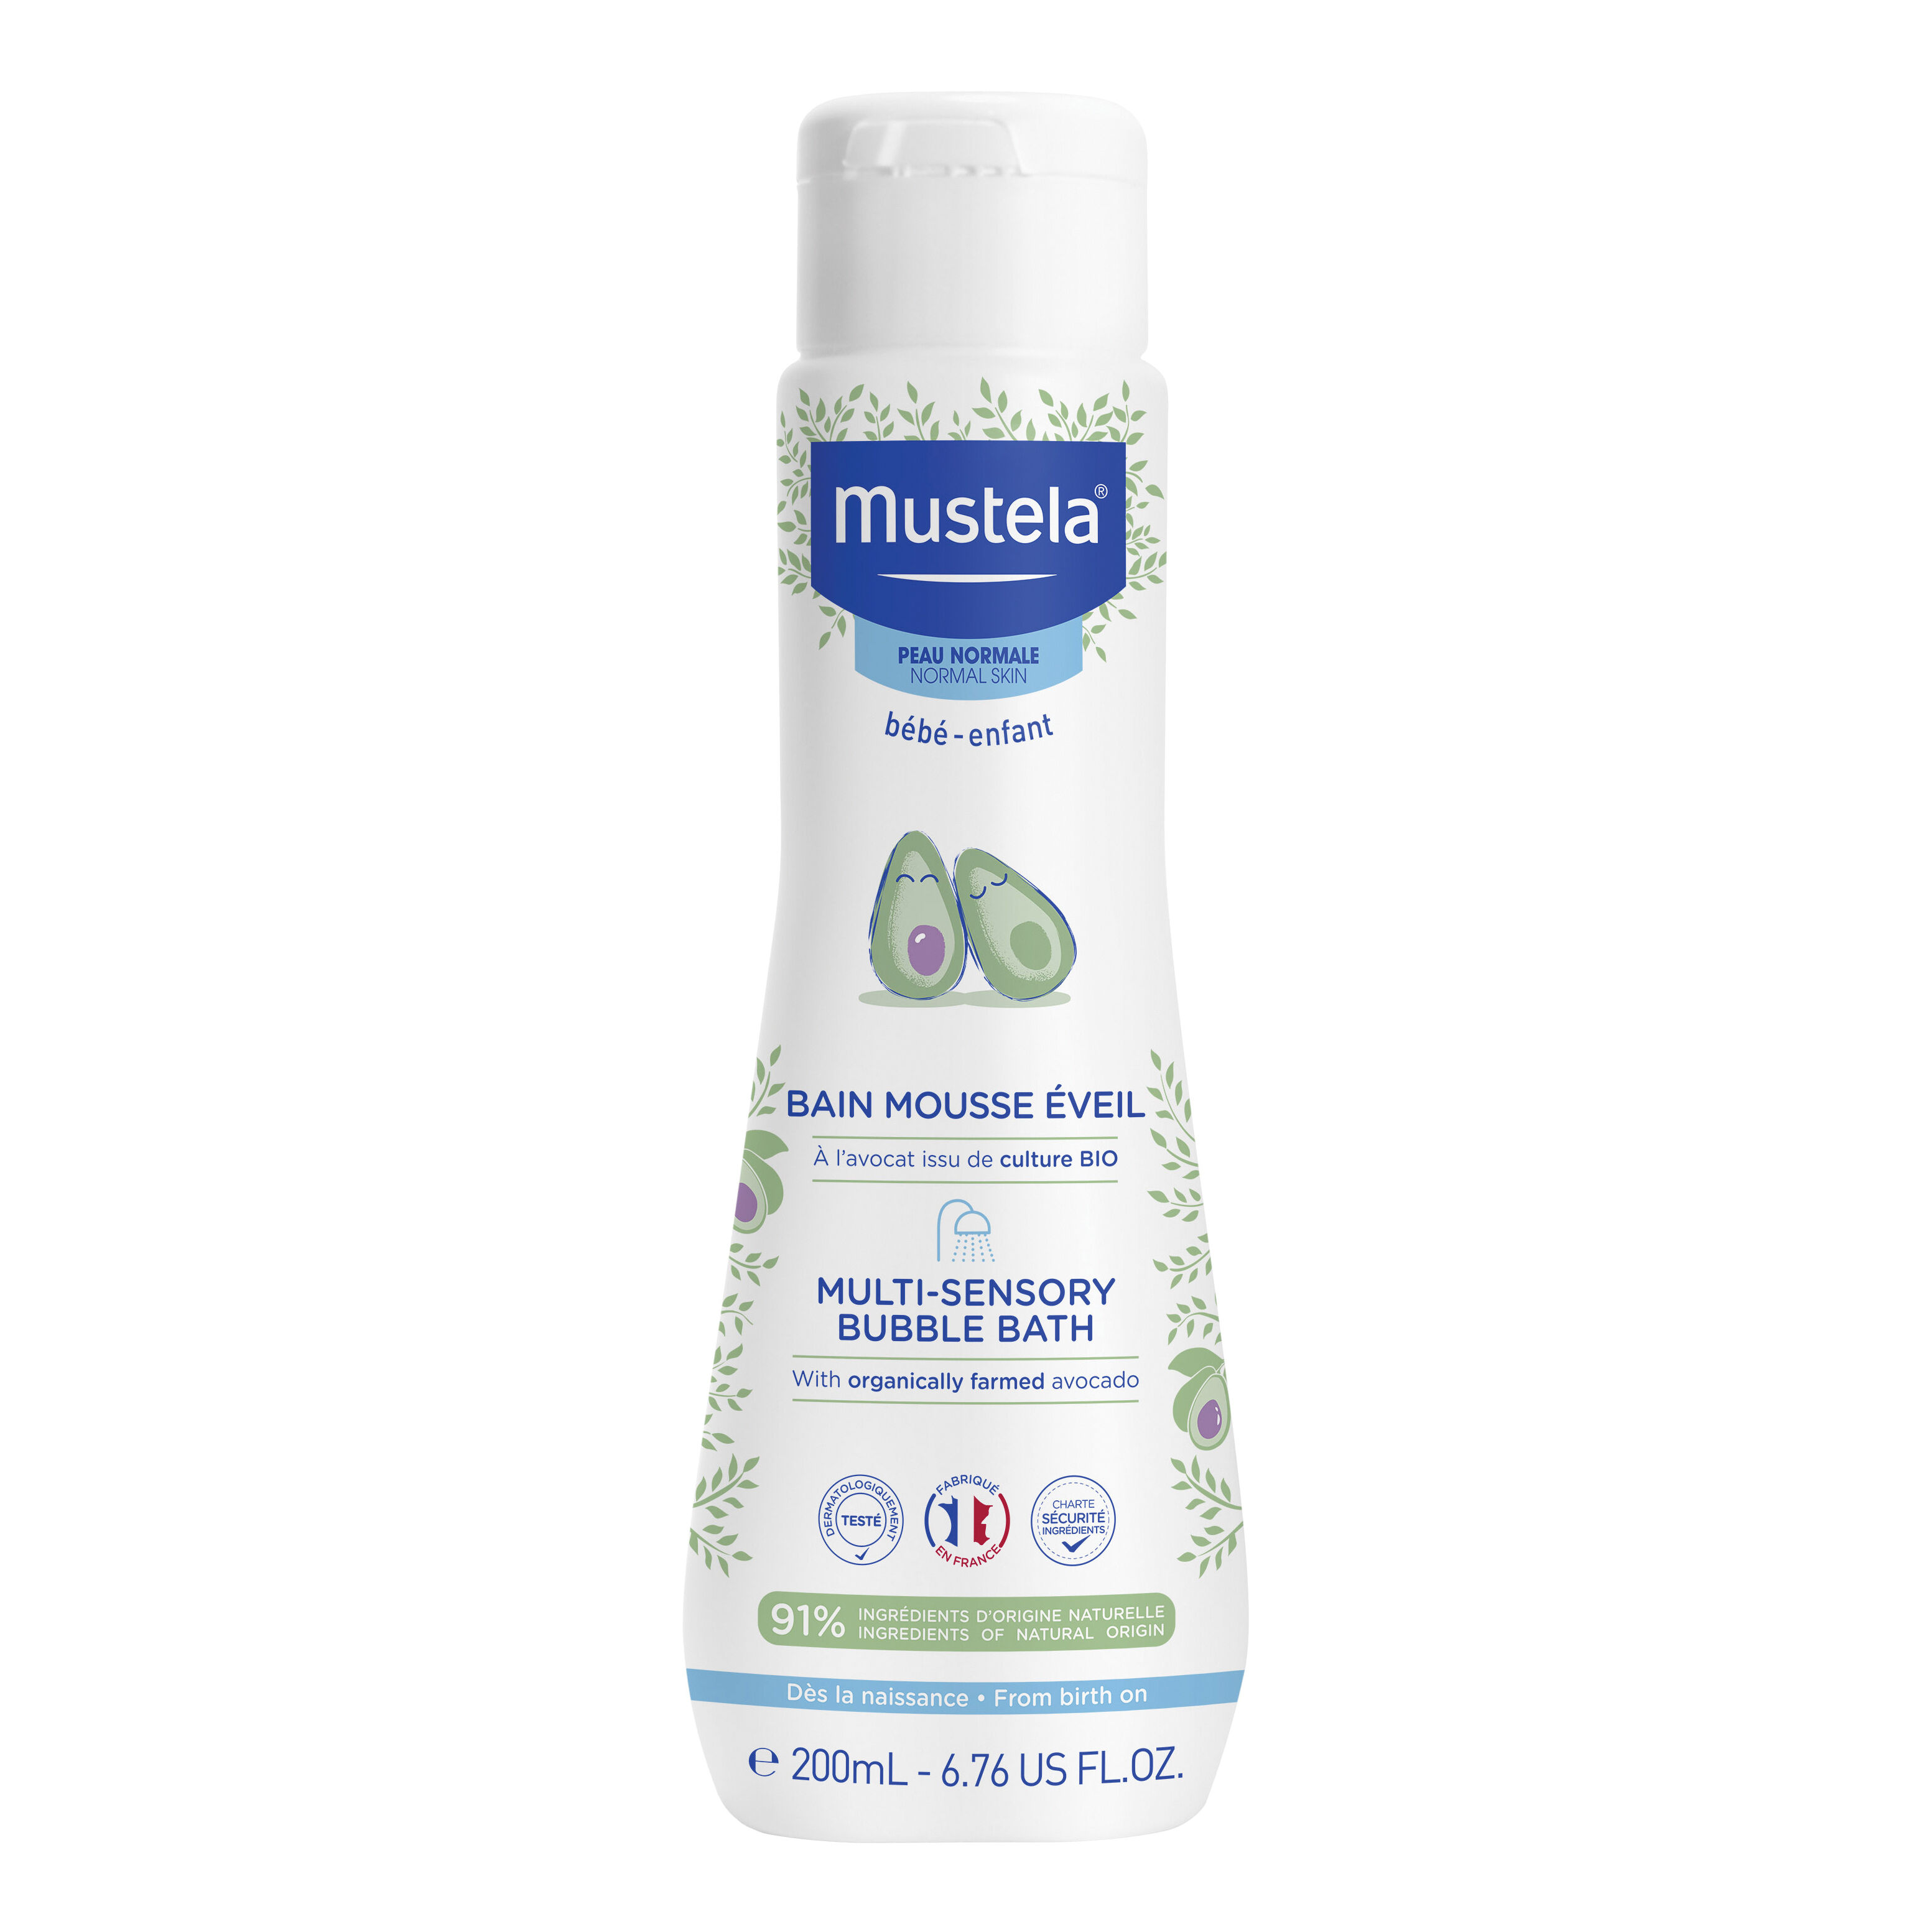 MUSTELA bagno mille bolle 200 ml 2020